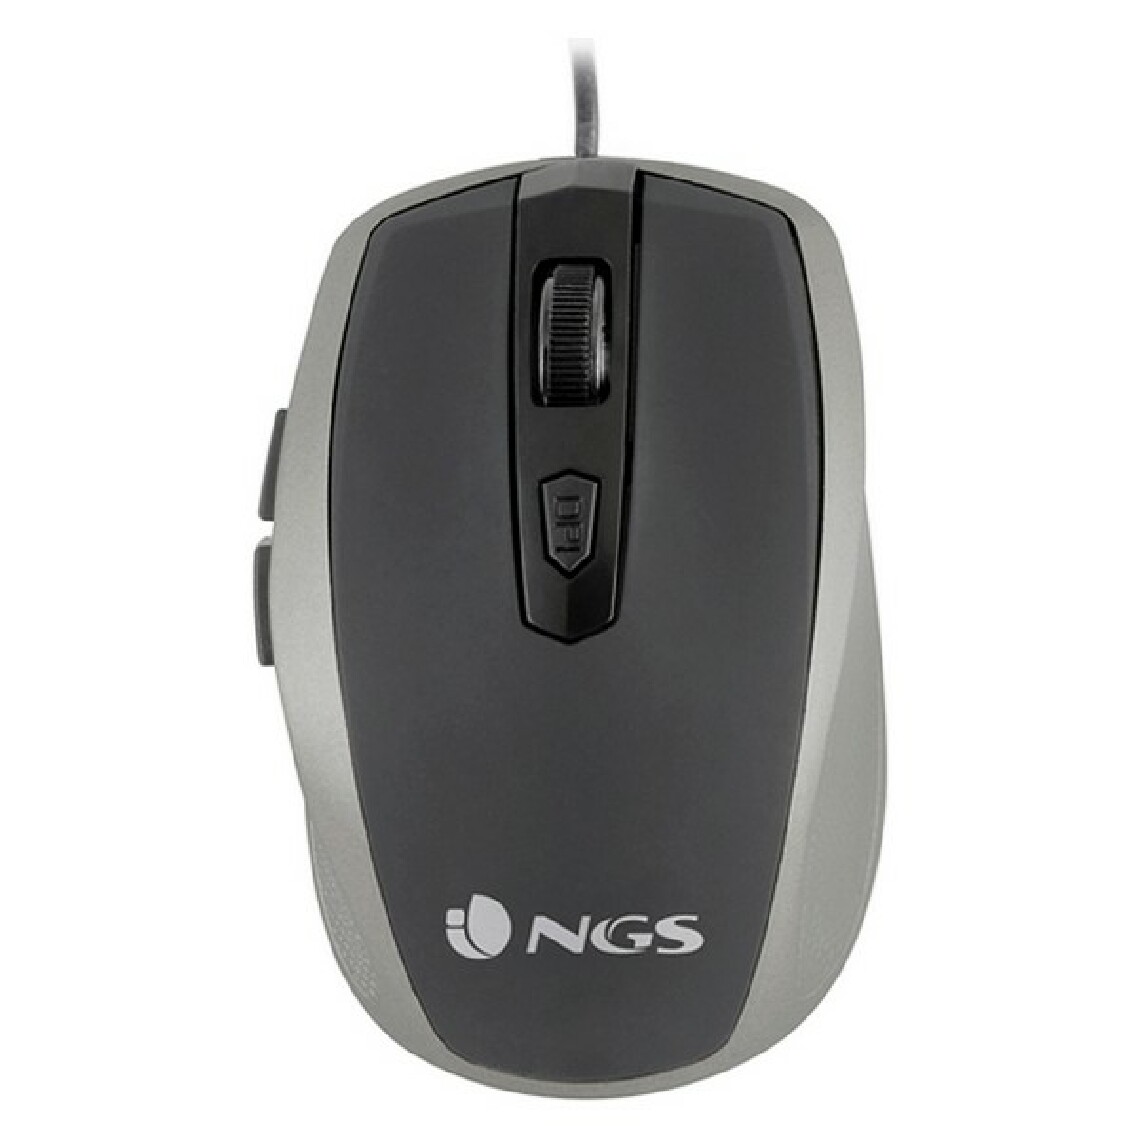 Ngs - Souris Optique NGS Tick Silver USB Argent - Souris